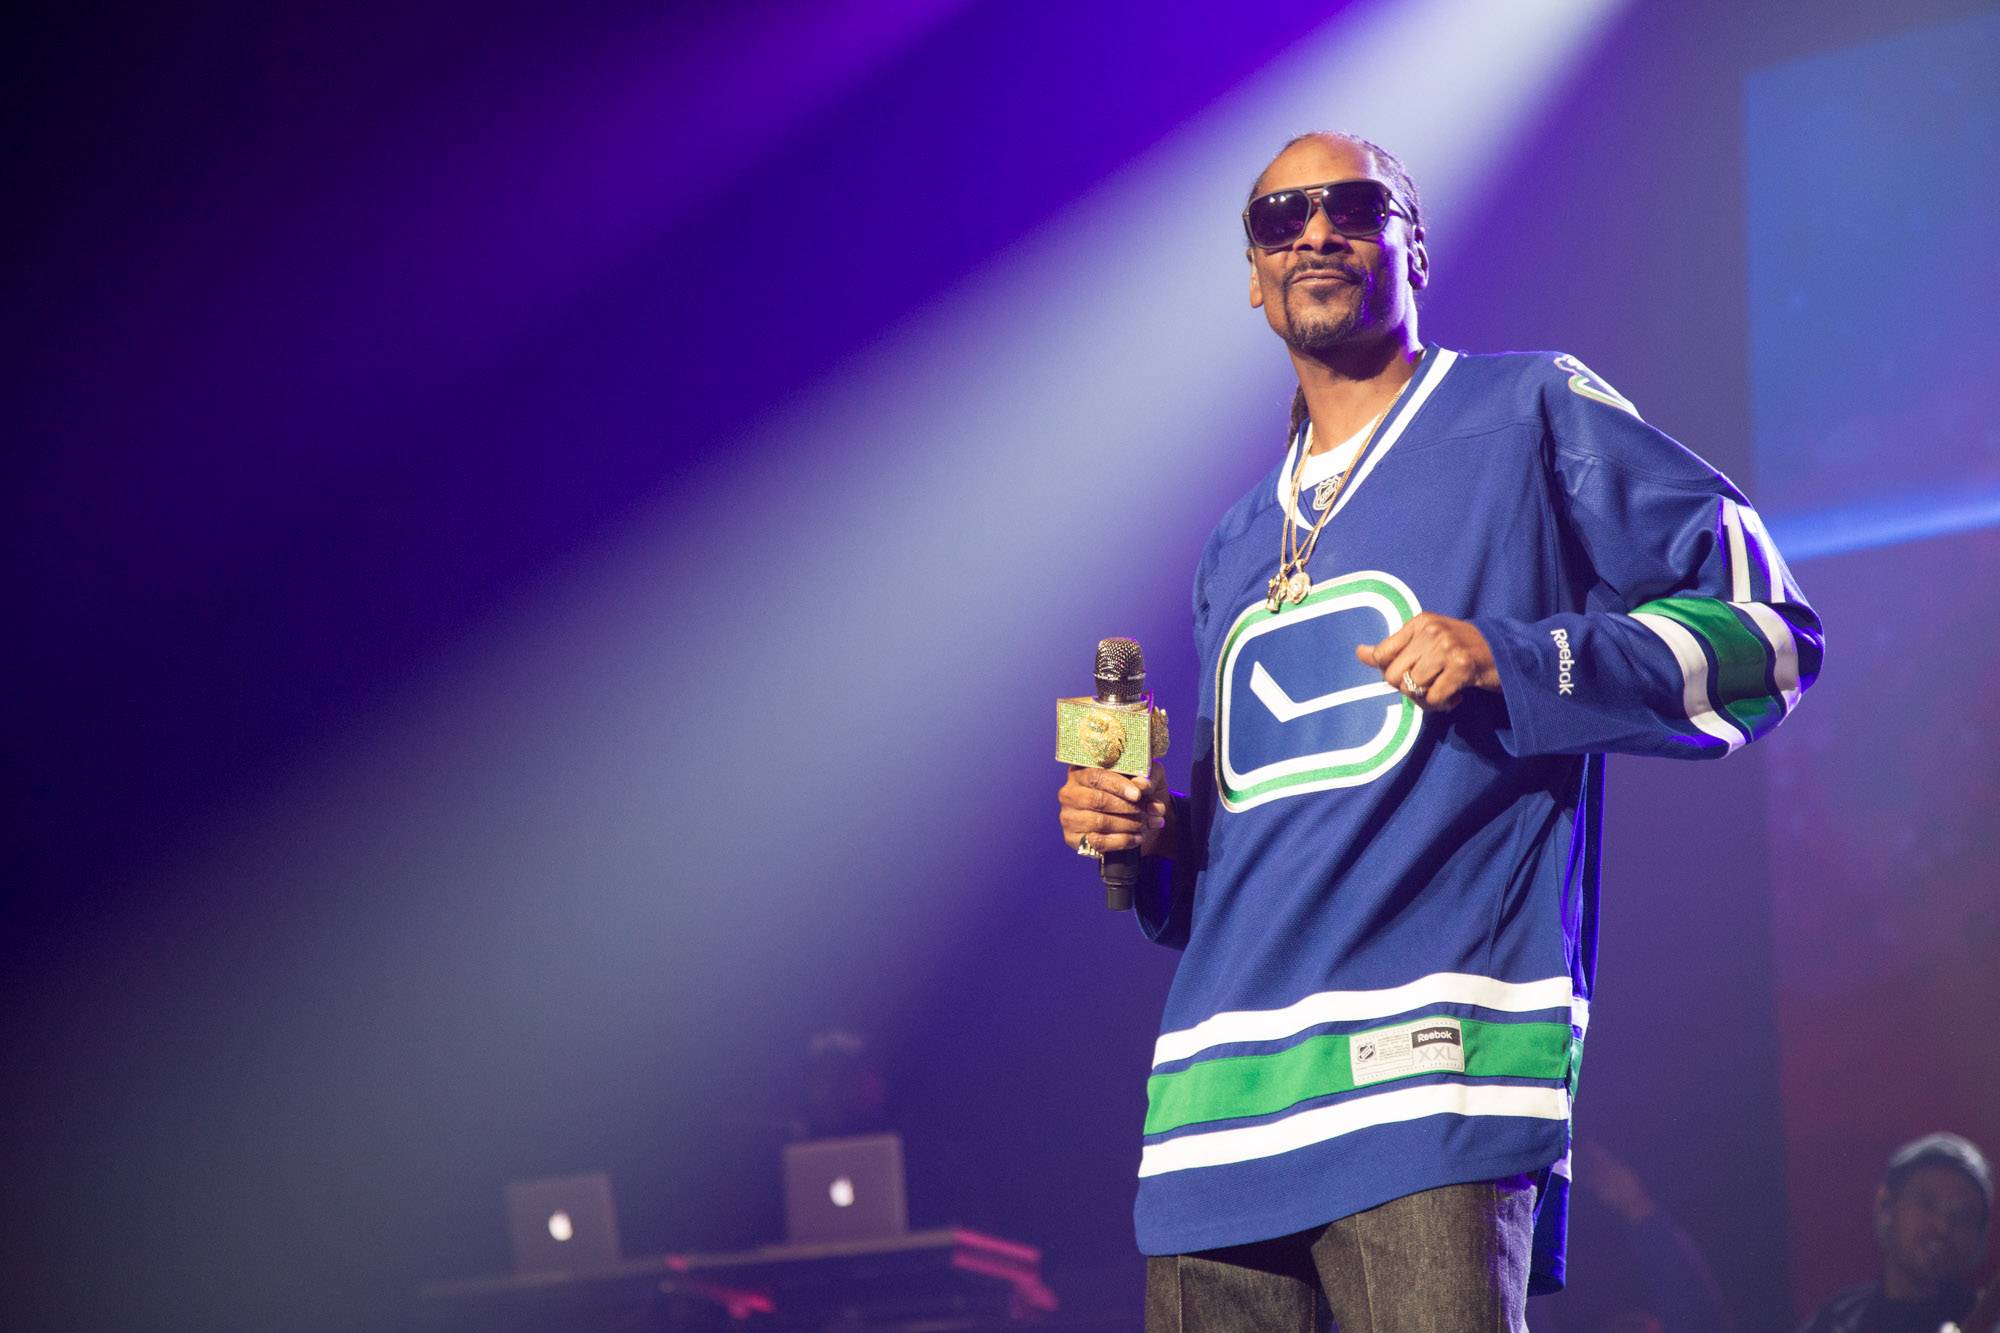 Snoop Dogg at Rogers Arena, Vancouver, Apr. 14 2017. Kirk Chantraine photo.